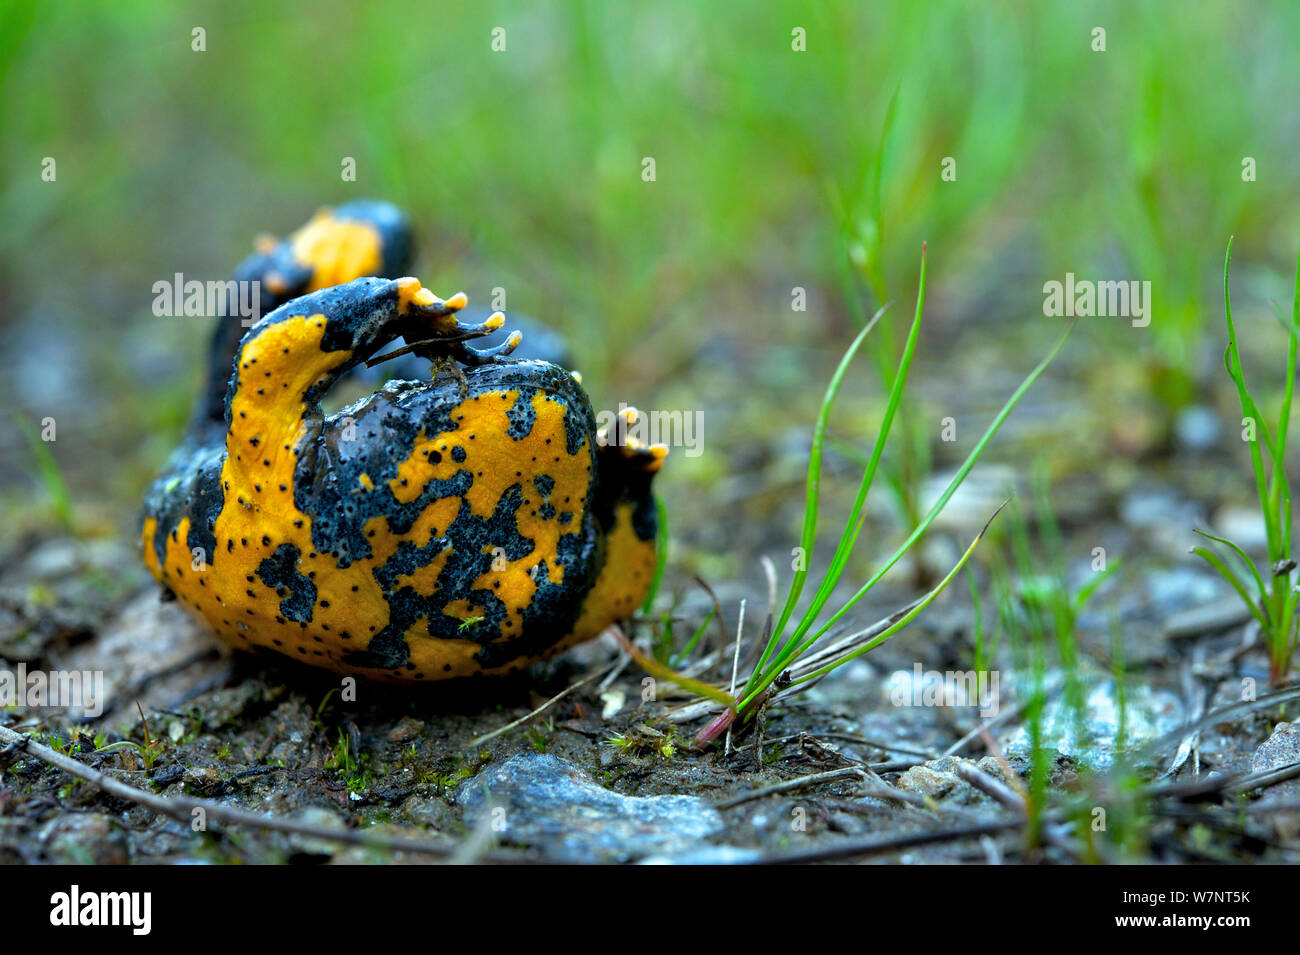 Yellow-bellied toad (Bombina variegata scabra) performing an unken reflex in order to show the warning coloration on the underparts of its body, Republic of Macedonia, May. Stock Photo